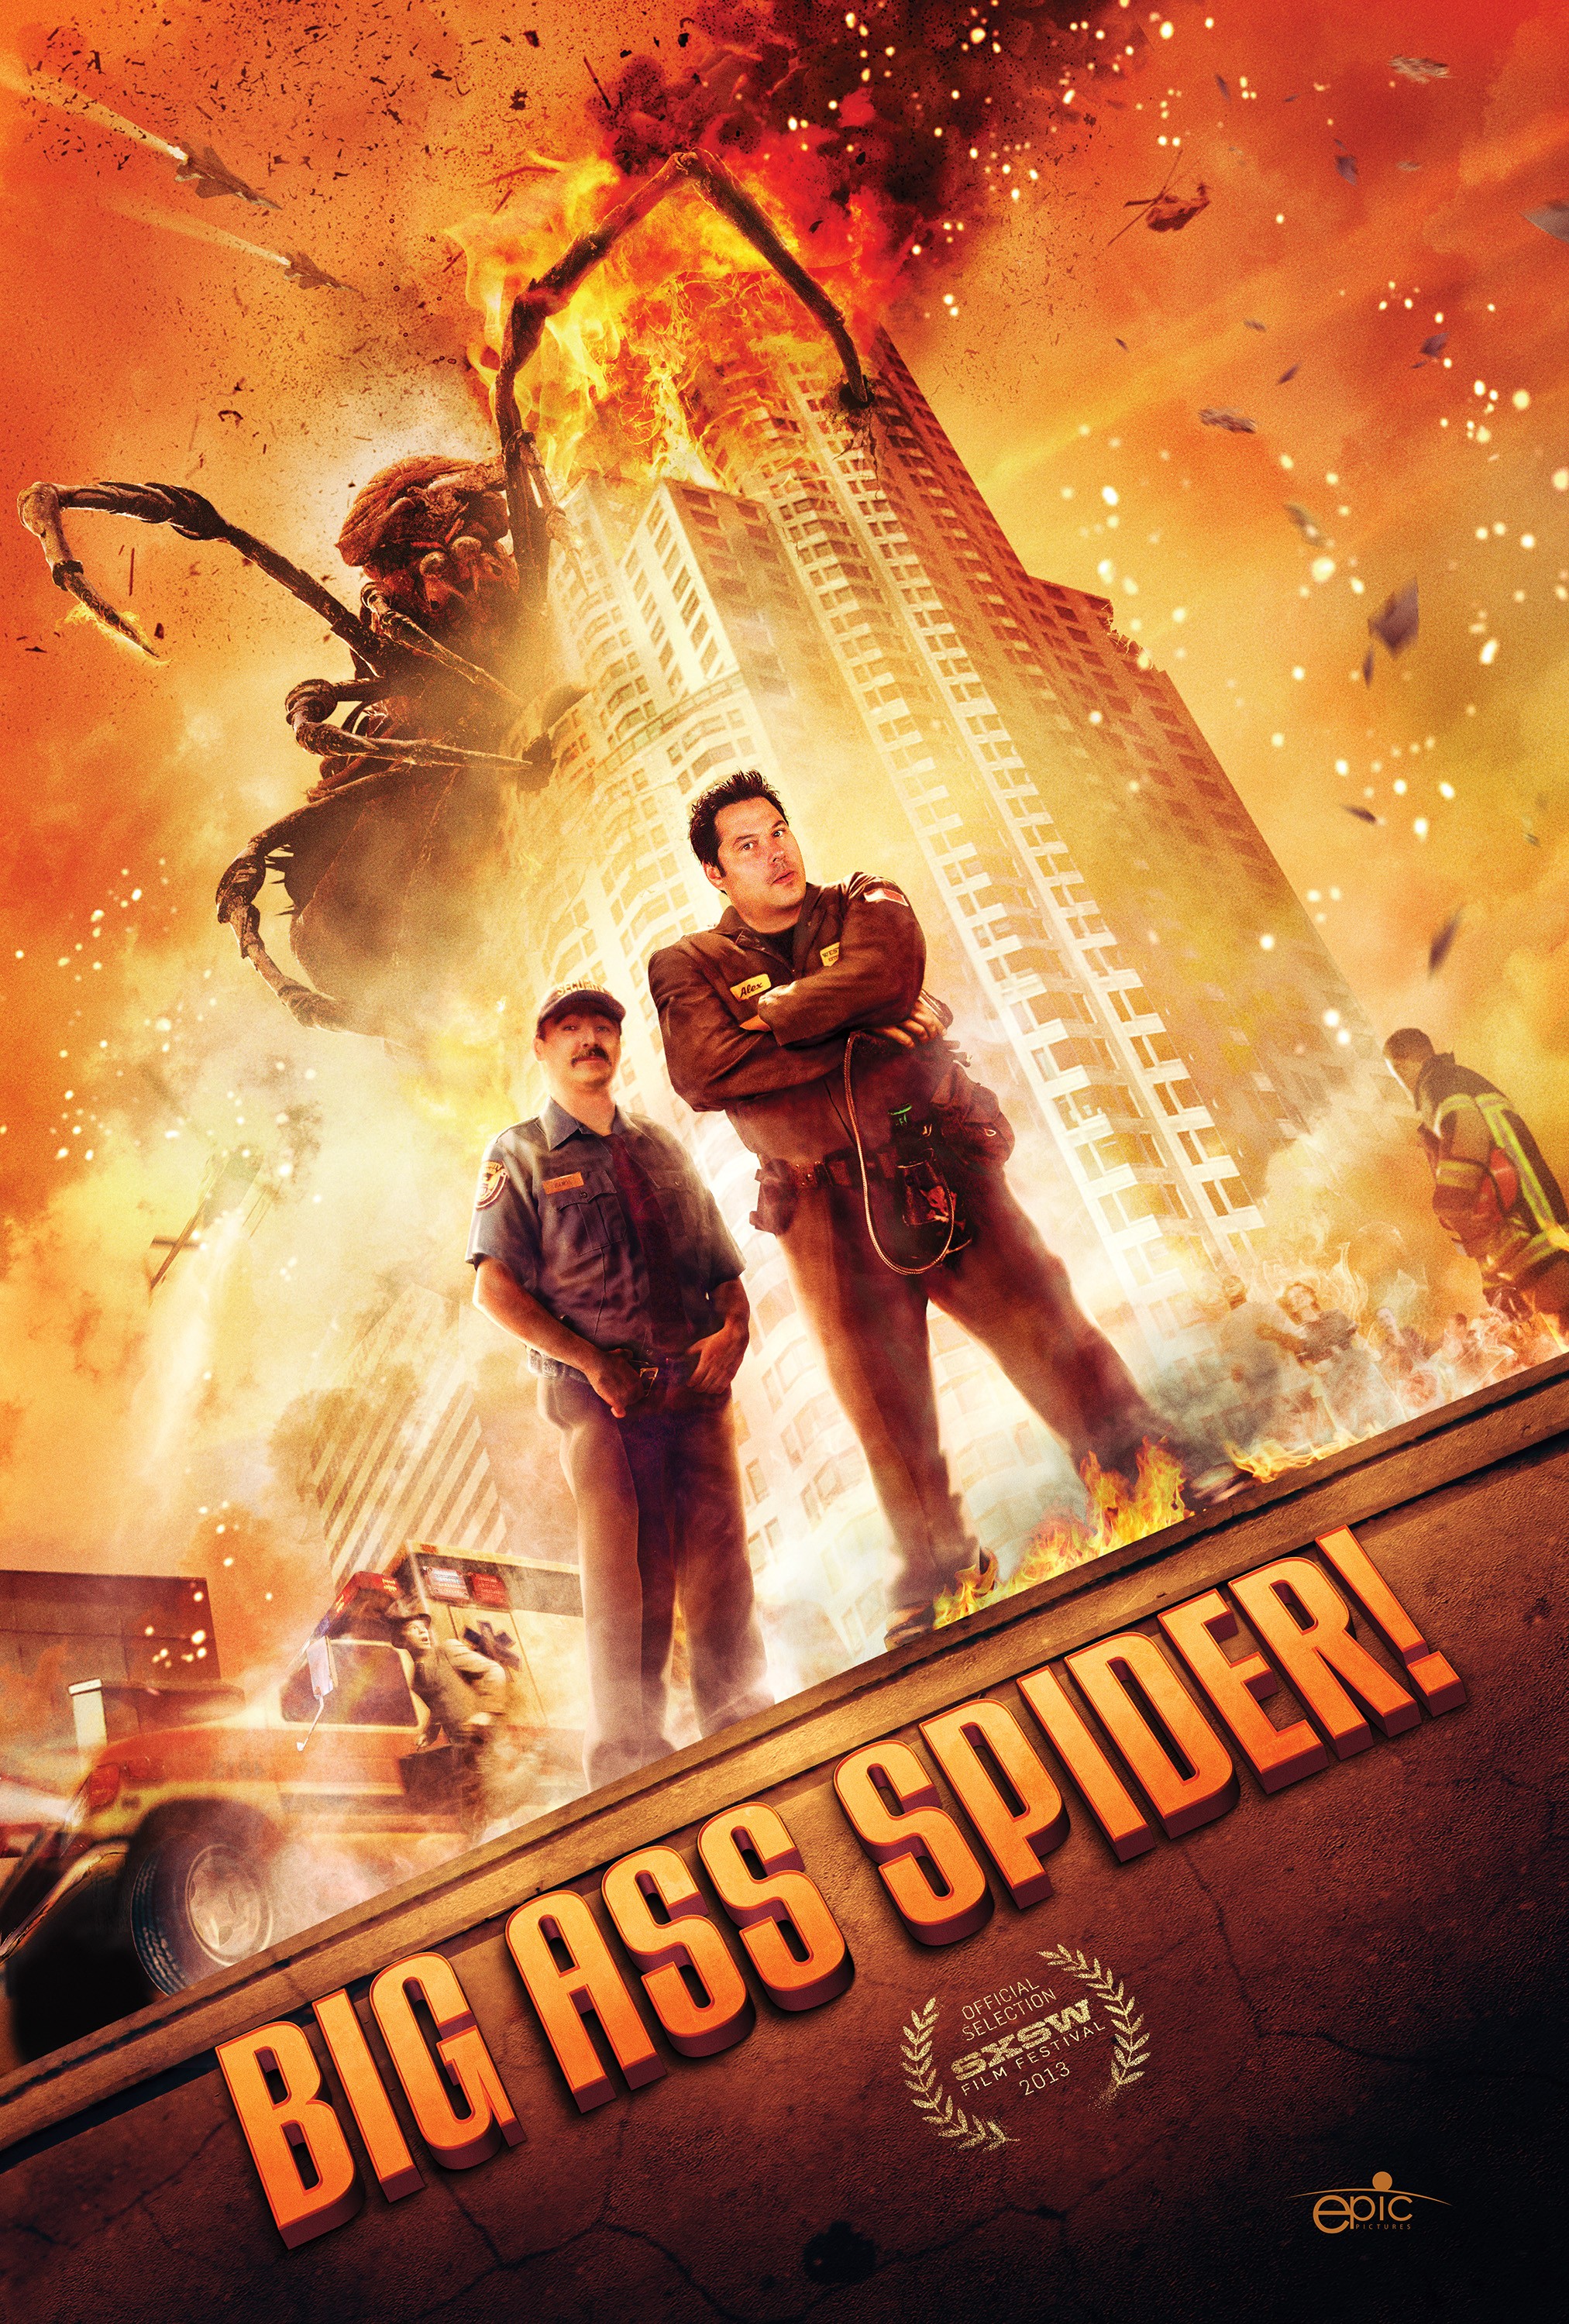 Mega Sized Movie Poster Image for Big Ass Spider 